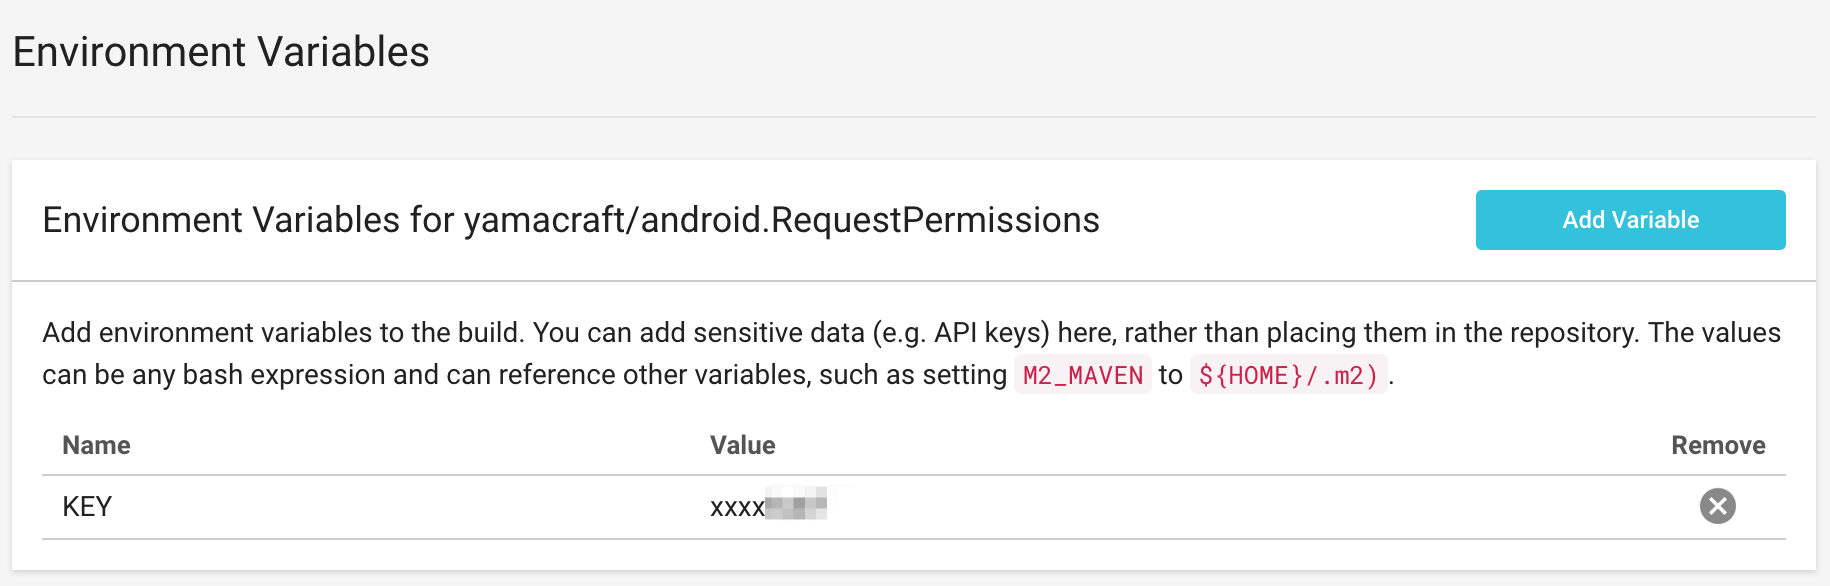 Project_settings_-_yamacraft_android_RequestPermissions_-_CircleCI.png